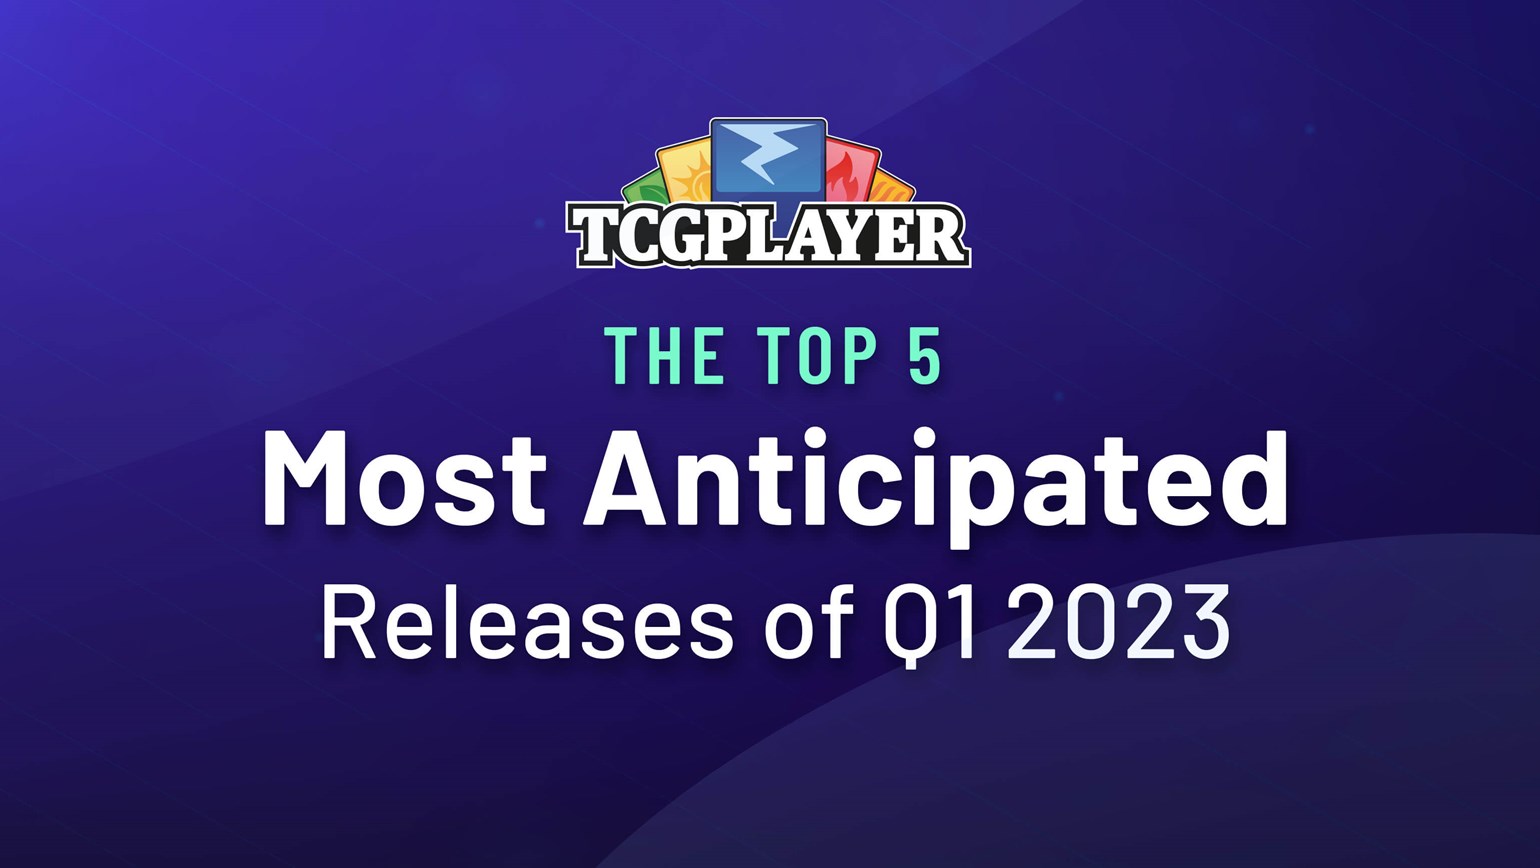 The Top 5 Most Anticipated Releases of Q1 2023